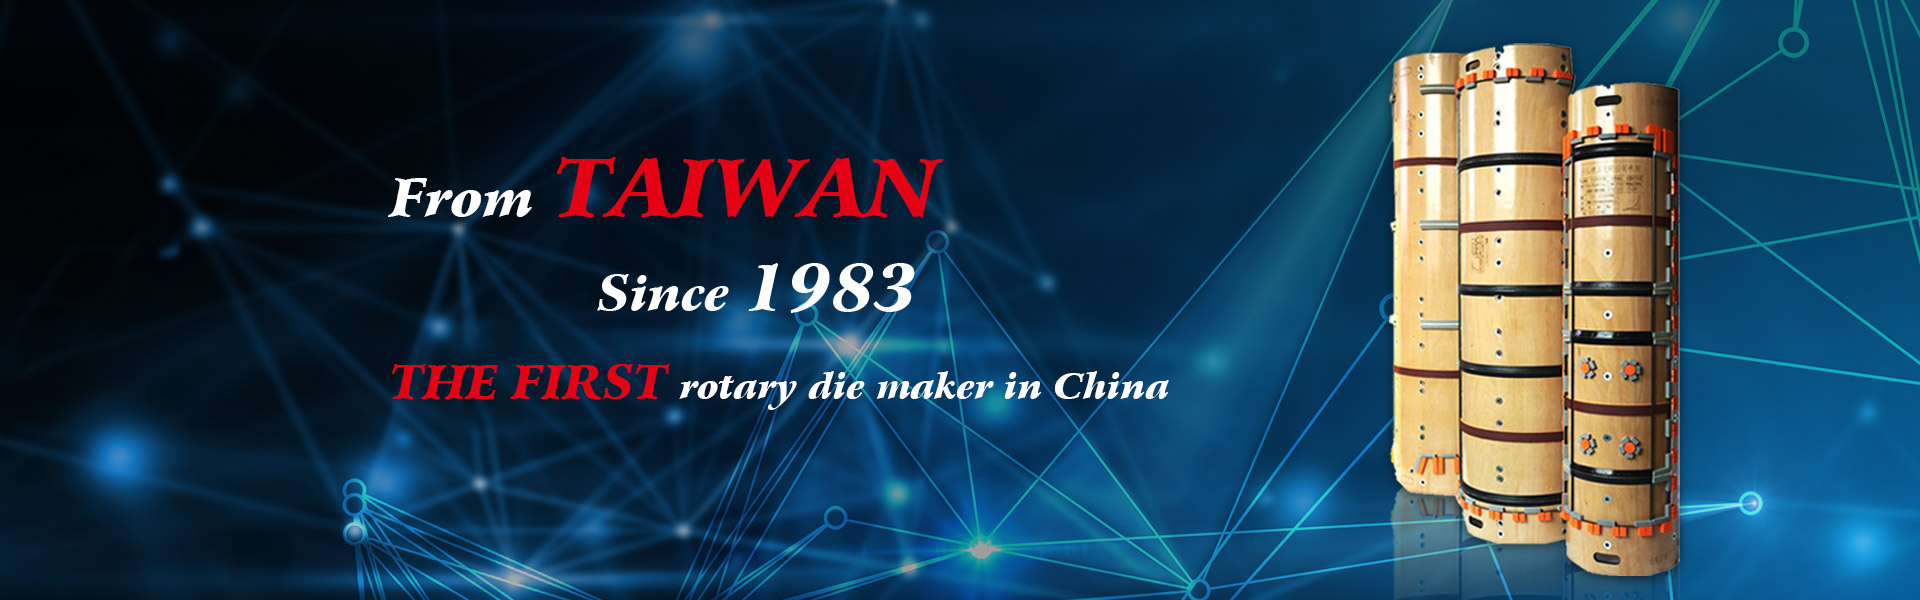 The first rotary die maker in China